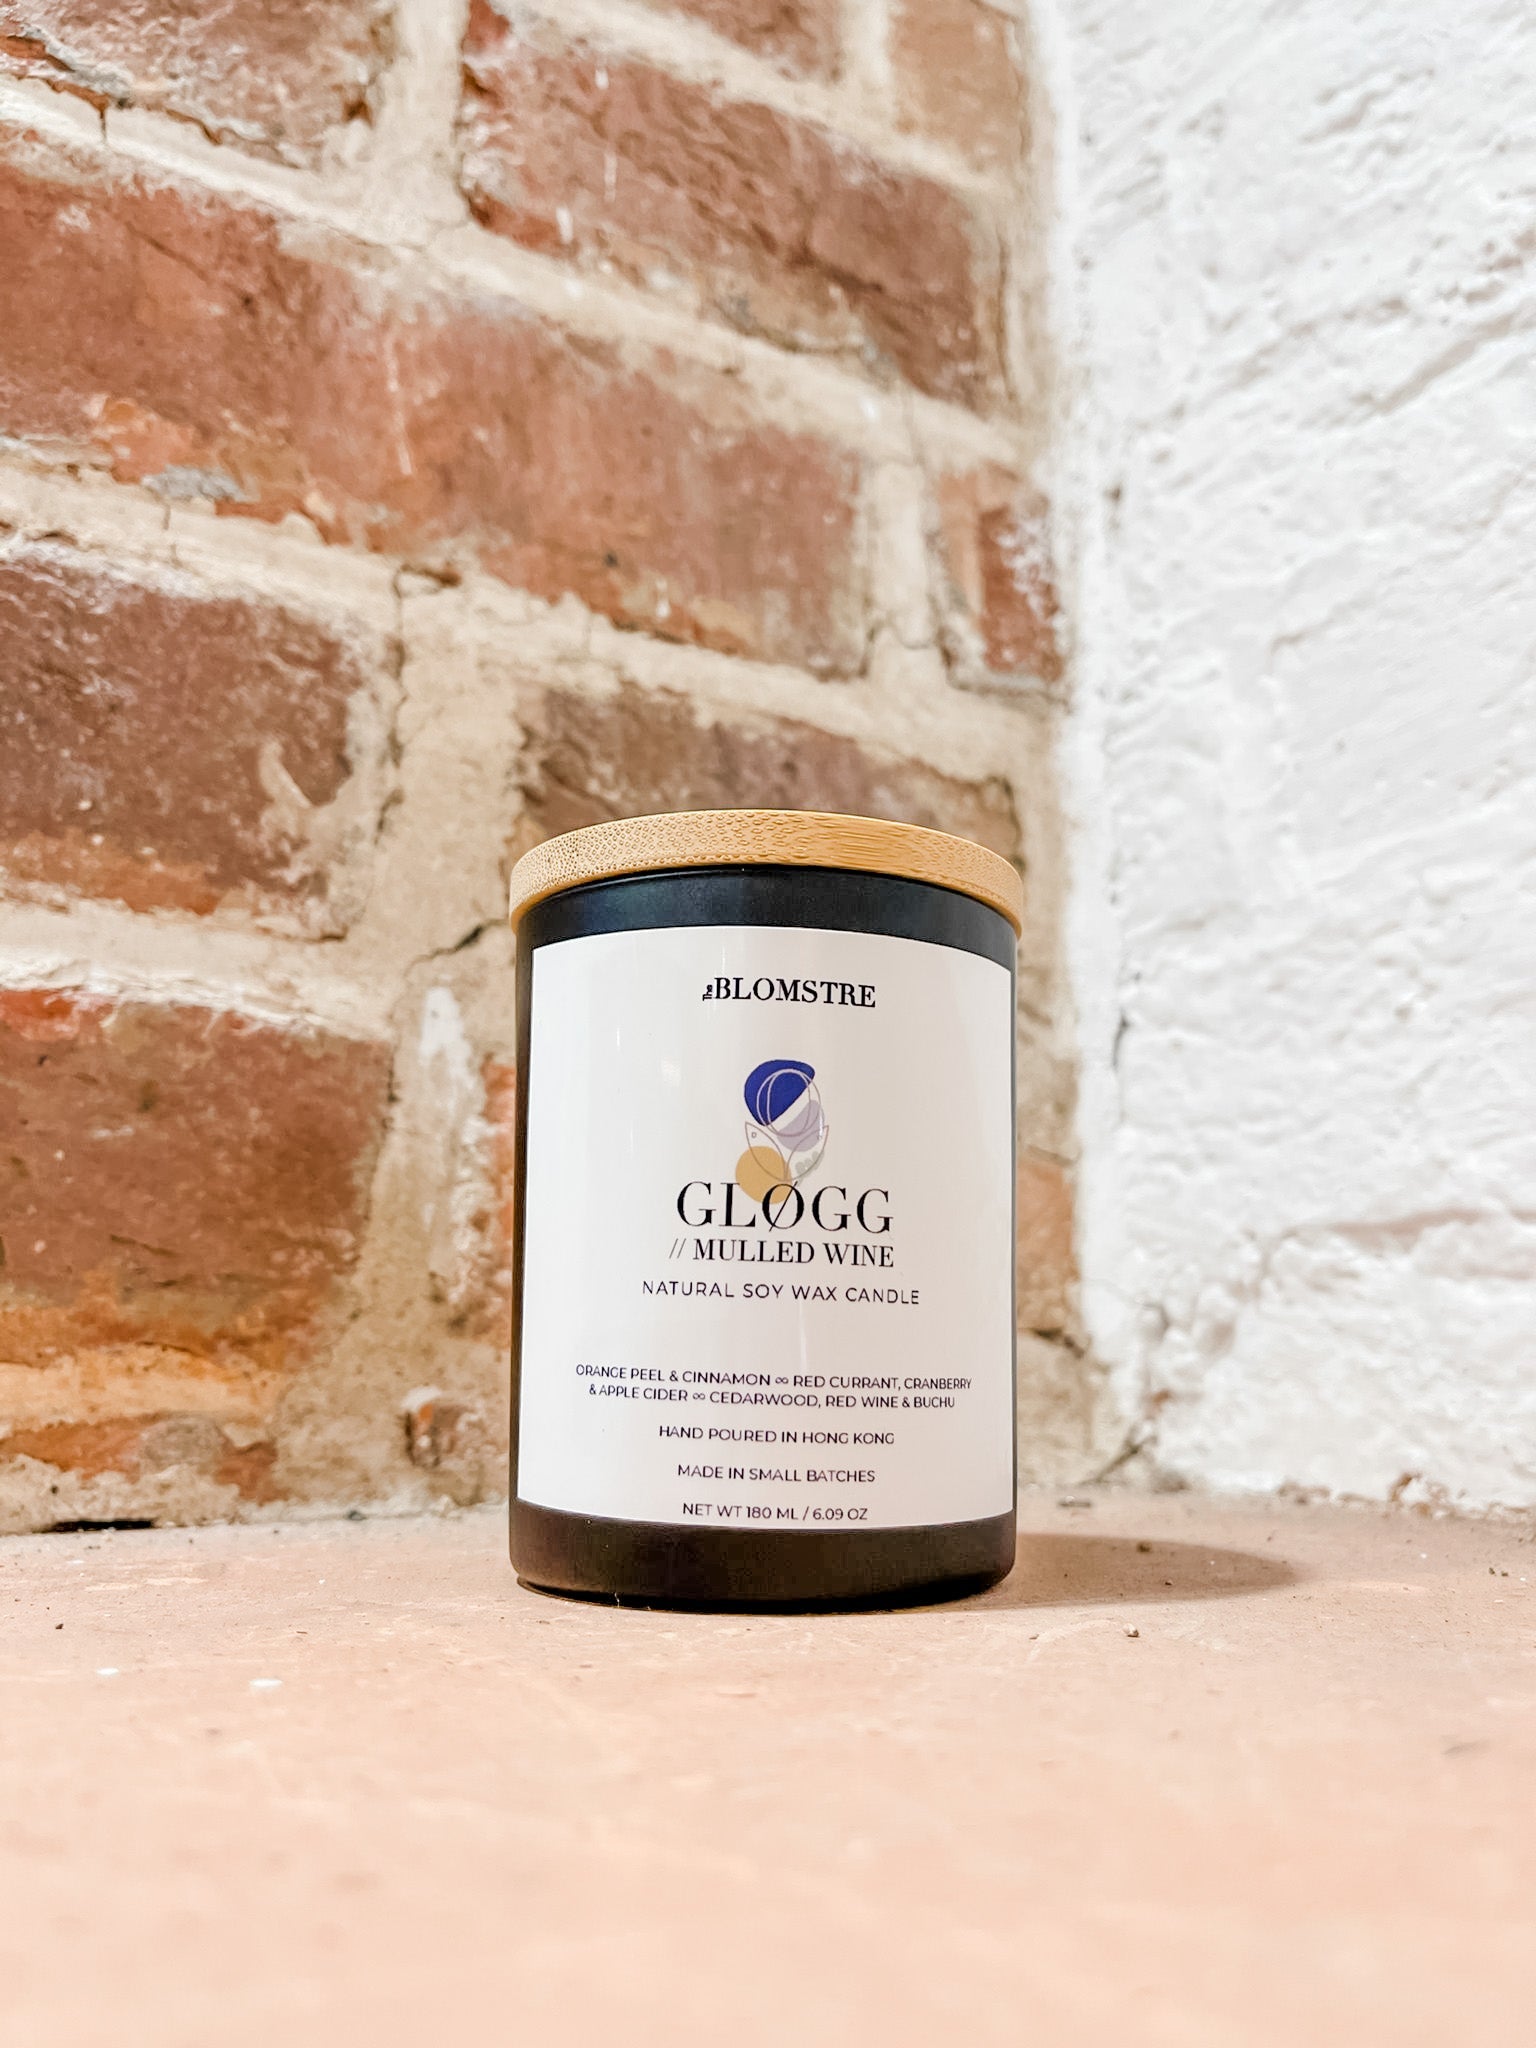 THE BLOMSTRE｜Soy Candle 180ml: GLOGG // Mulled Wine